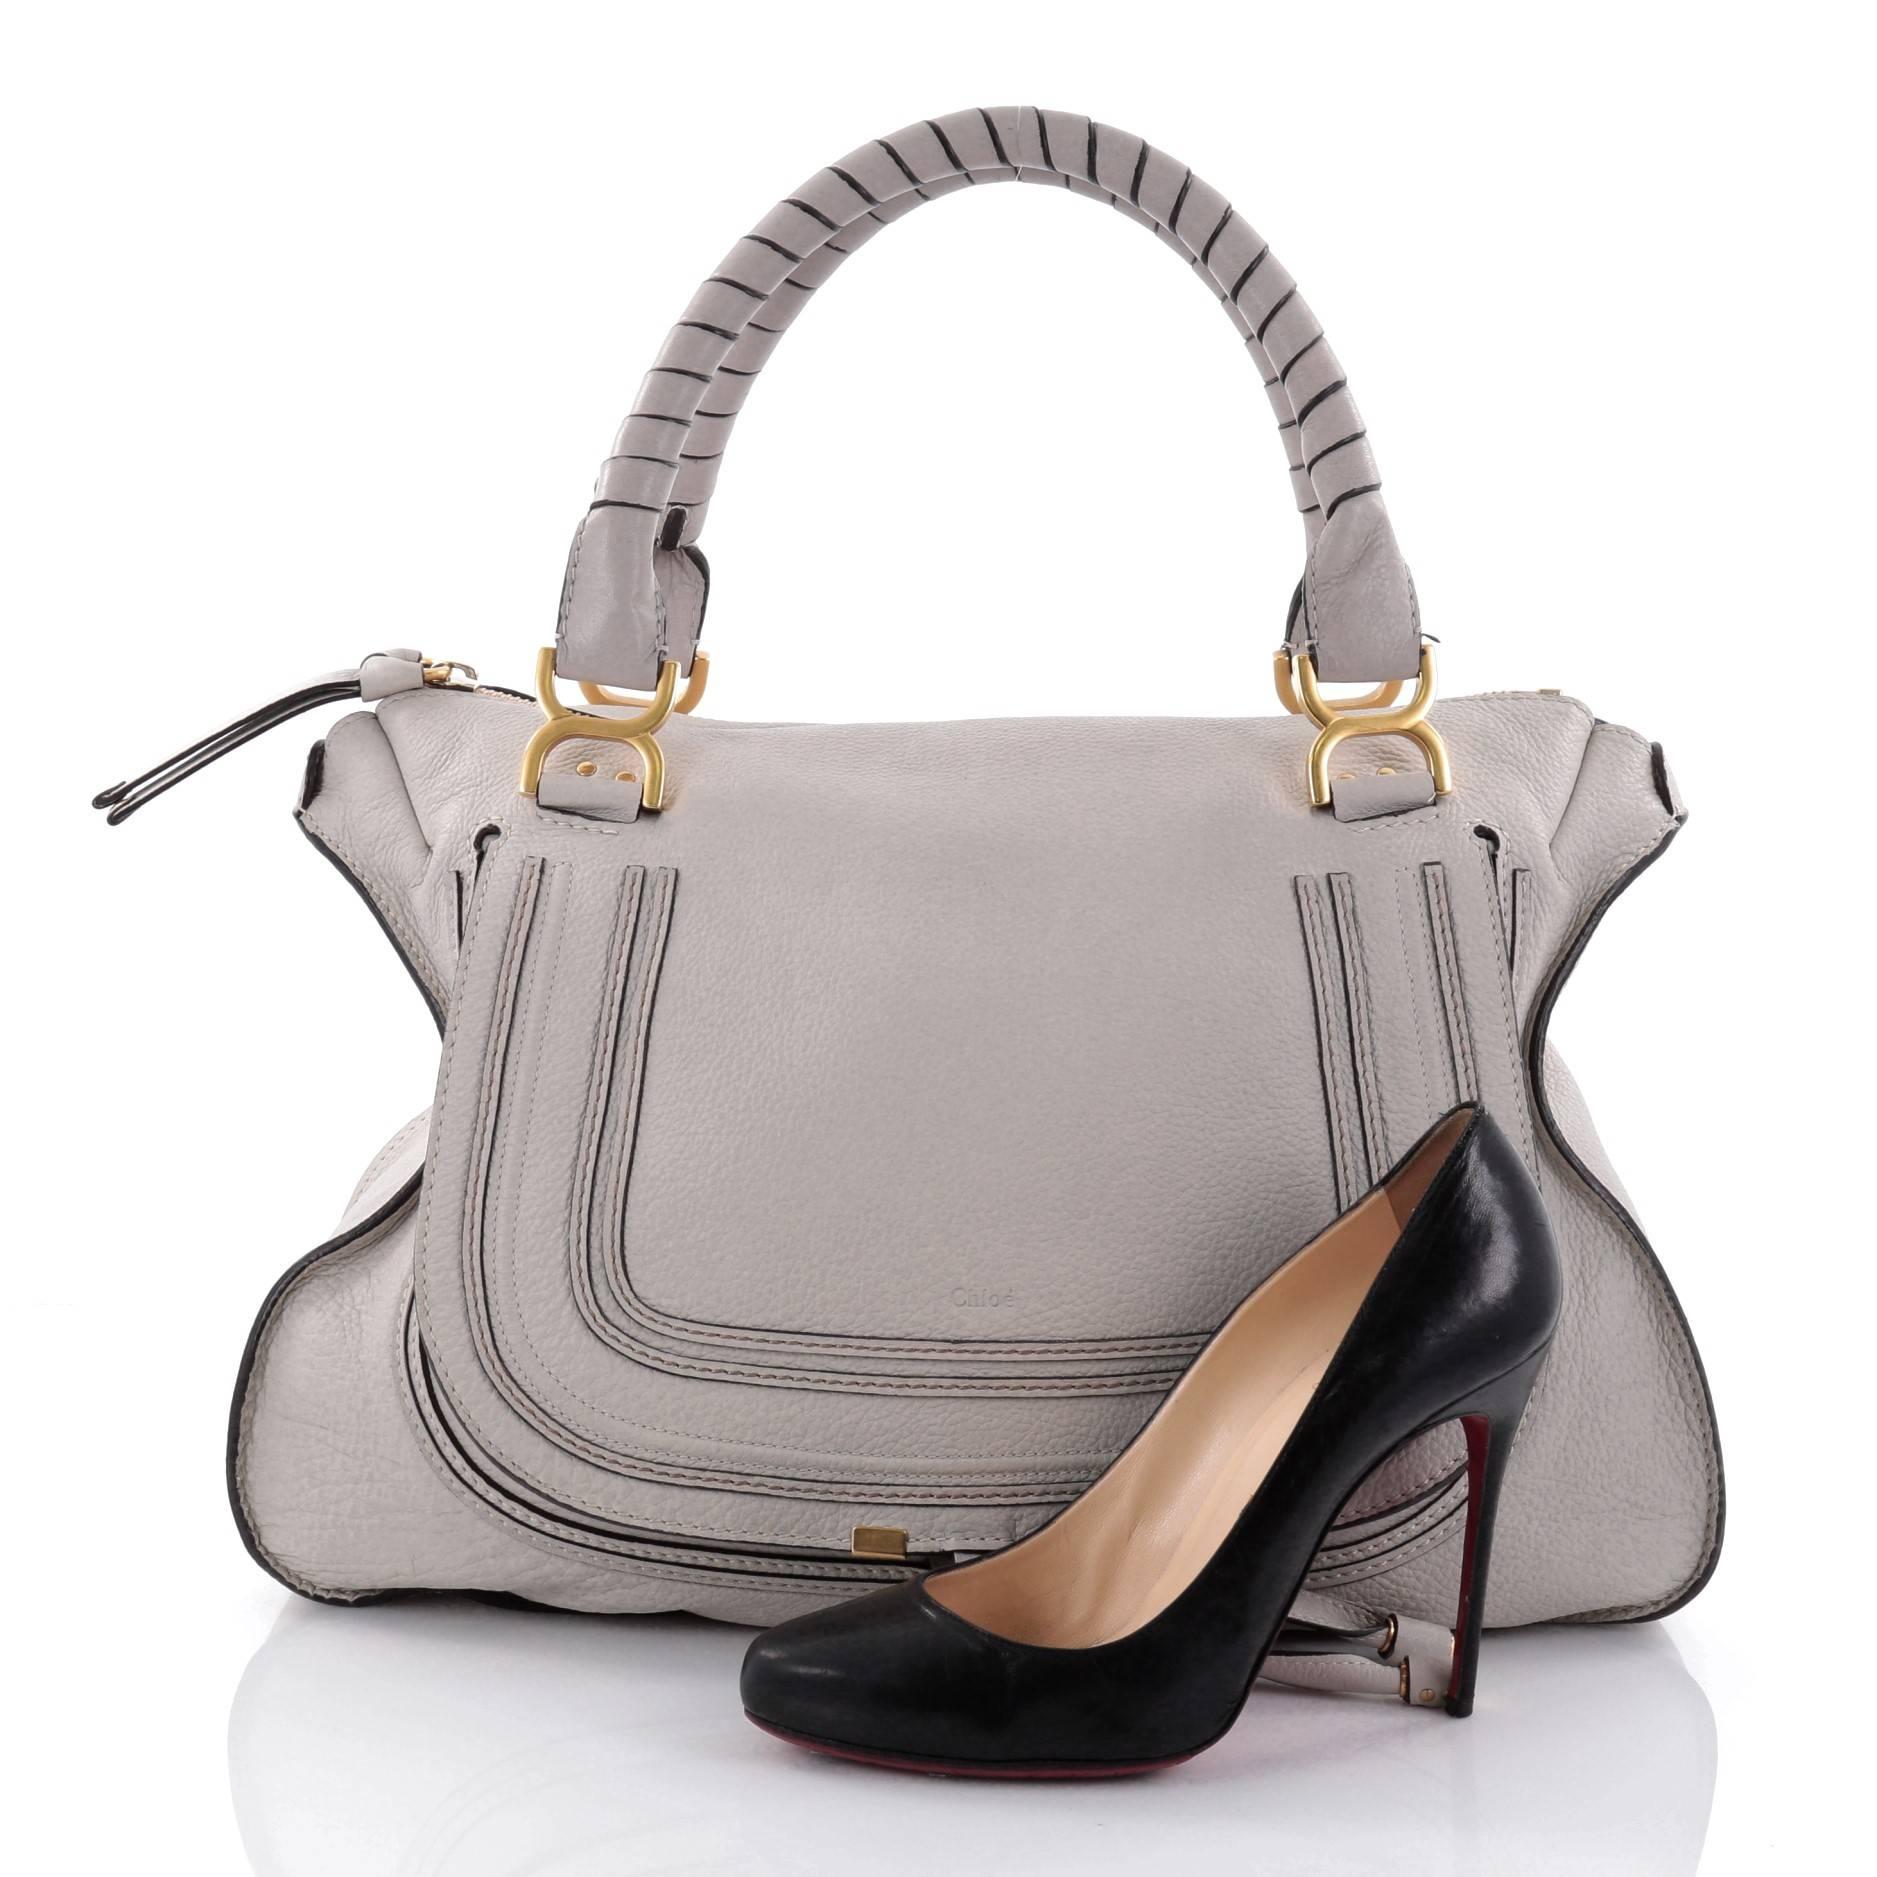 This authentic Chloe Marcie Shoulder Bag Leather Large showcases the brand's popular horseshoe design in a classic hobo silhouette. Constructed from light grey leather, this functional yet stylish hobo bag features a slouchy, easy-to-carry